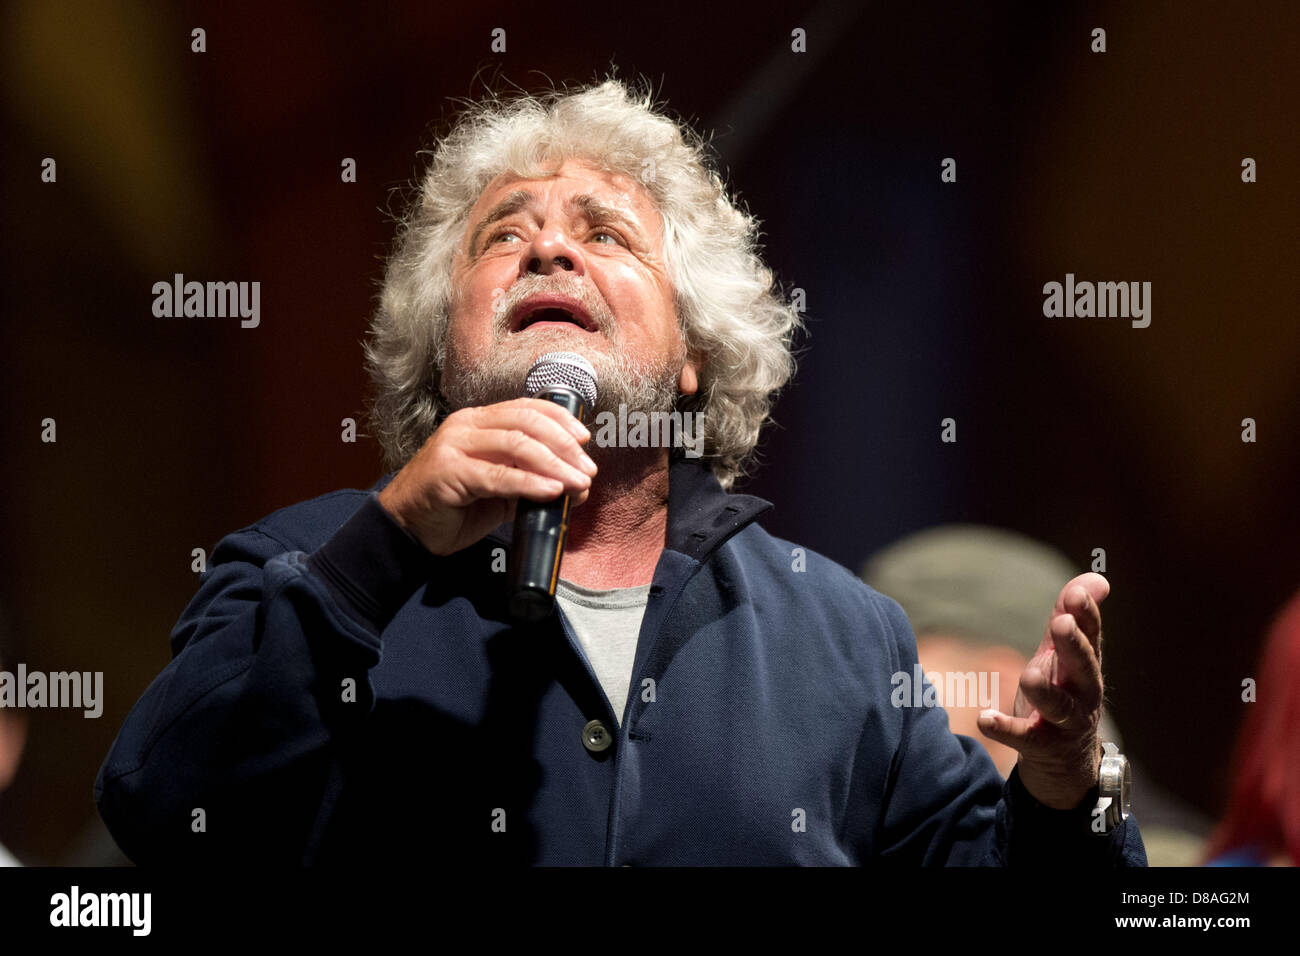 Imola, Italy. 22nd May 2013. Beppe Grillo, a leading political figure of the 'Movimento 5 Stelle', Italian political movement, held a rally in Imola, Italy, (Photo by Enrico Calderoni/AFLO/Alamy Live News) Stock Photo